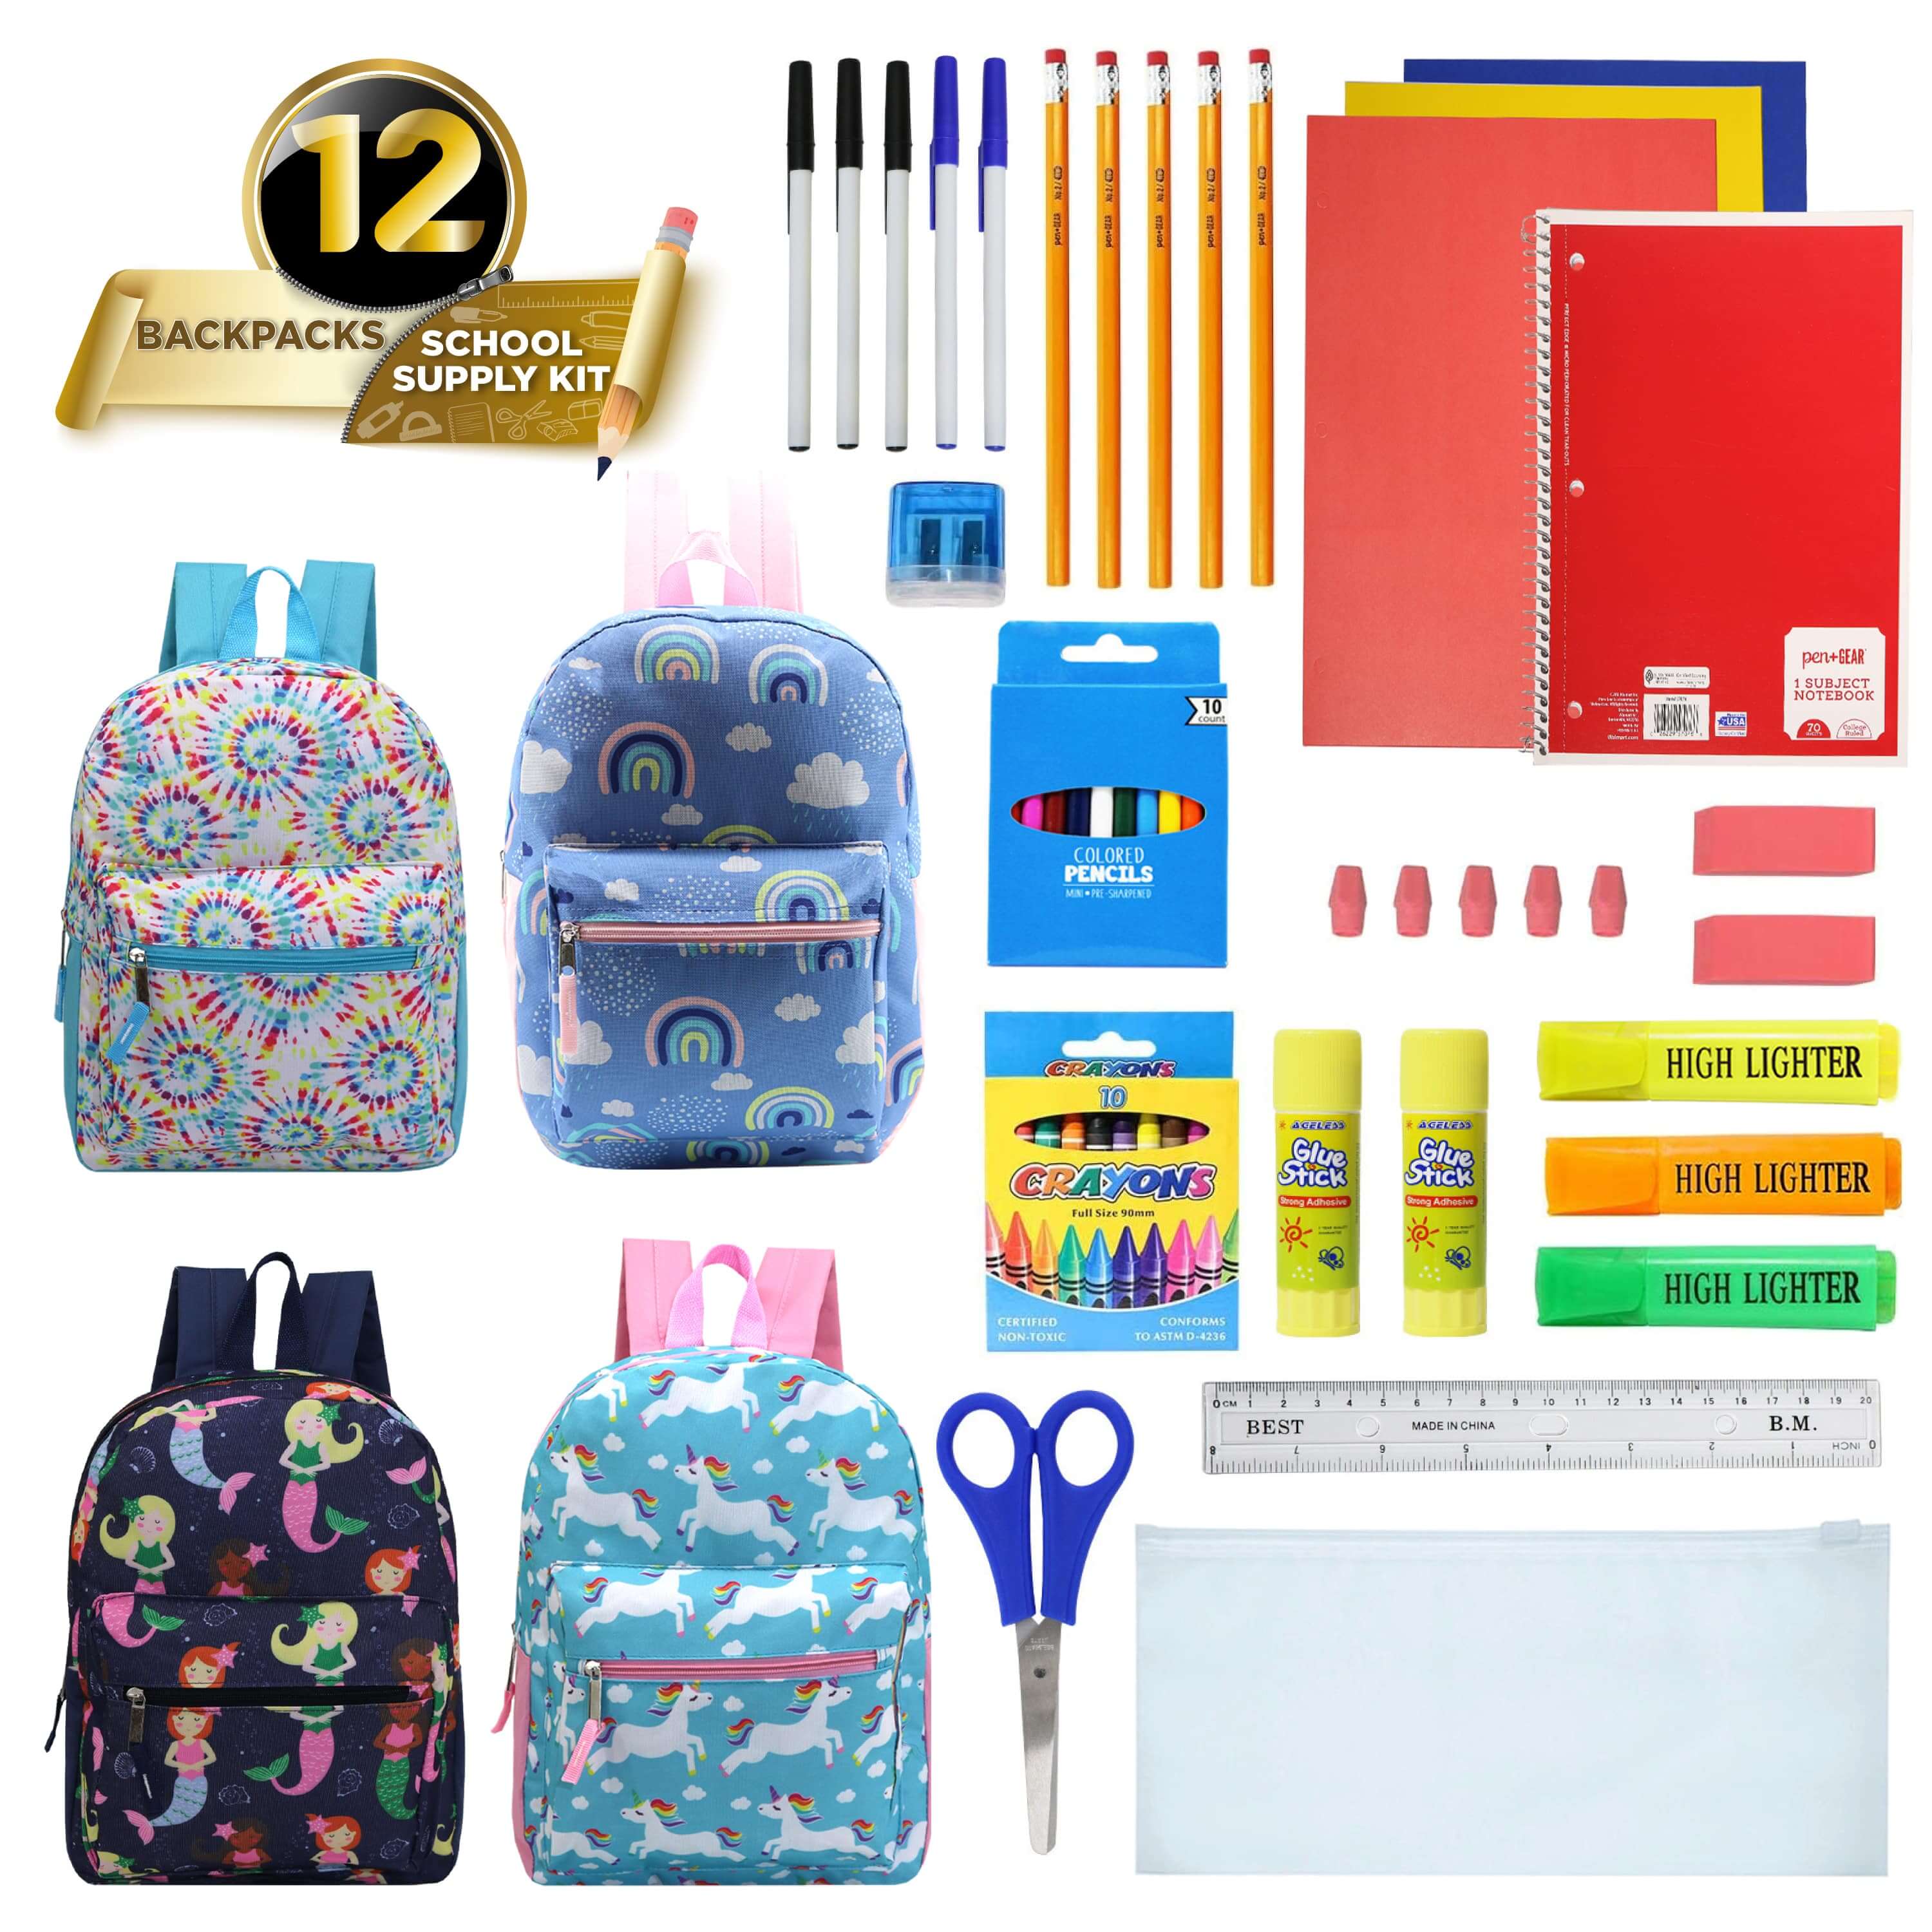 17 Inch Bulk Backpacks in Assorted Prints with School Supply Kits Wholesale - Case of 12